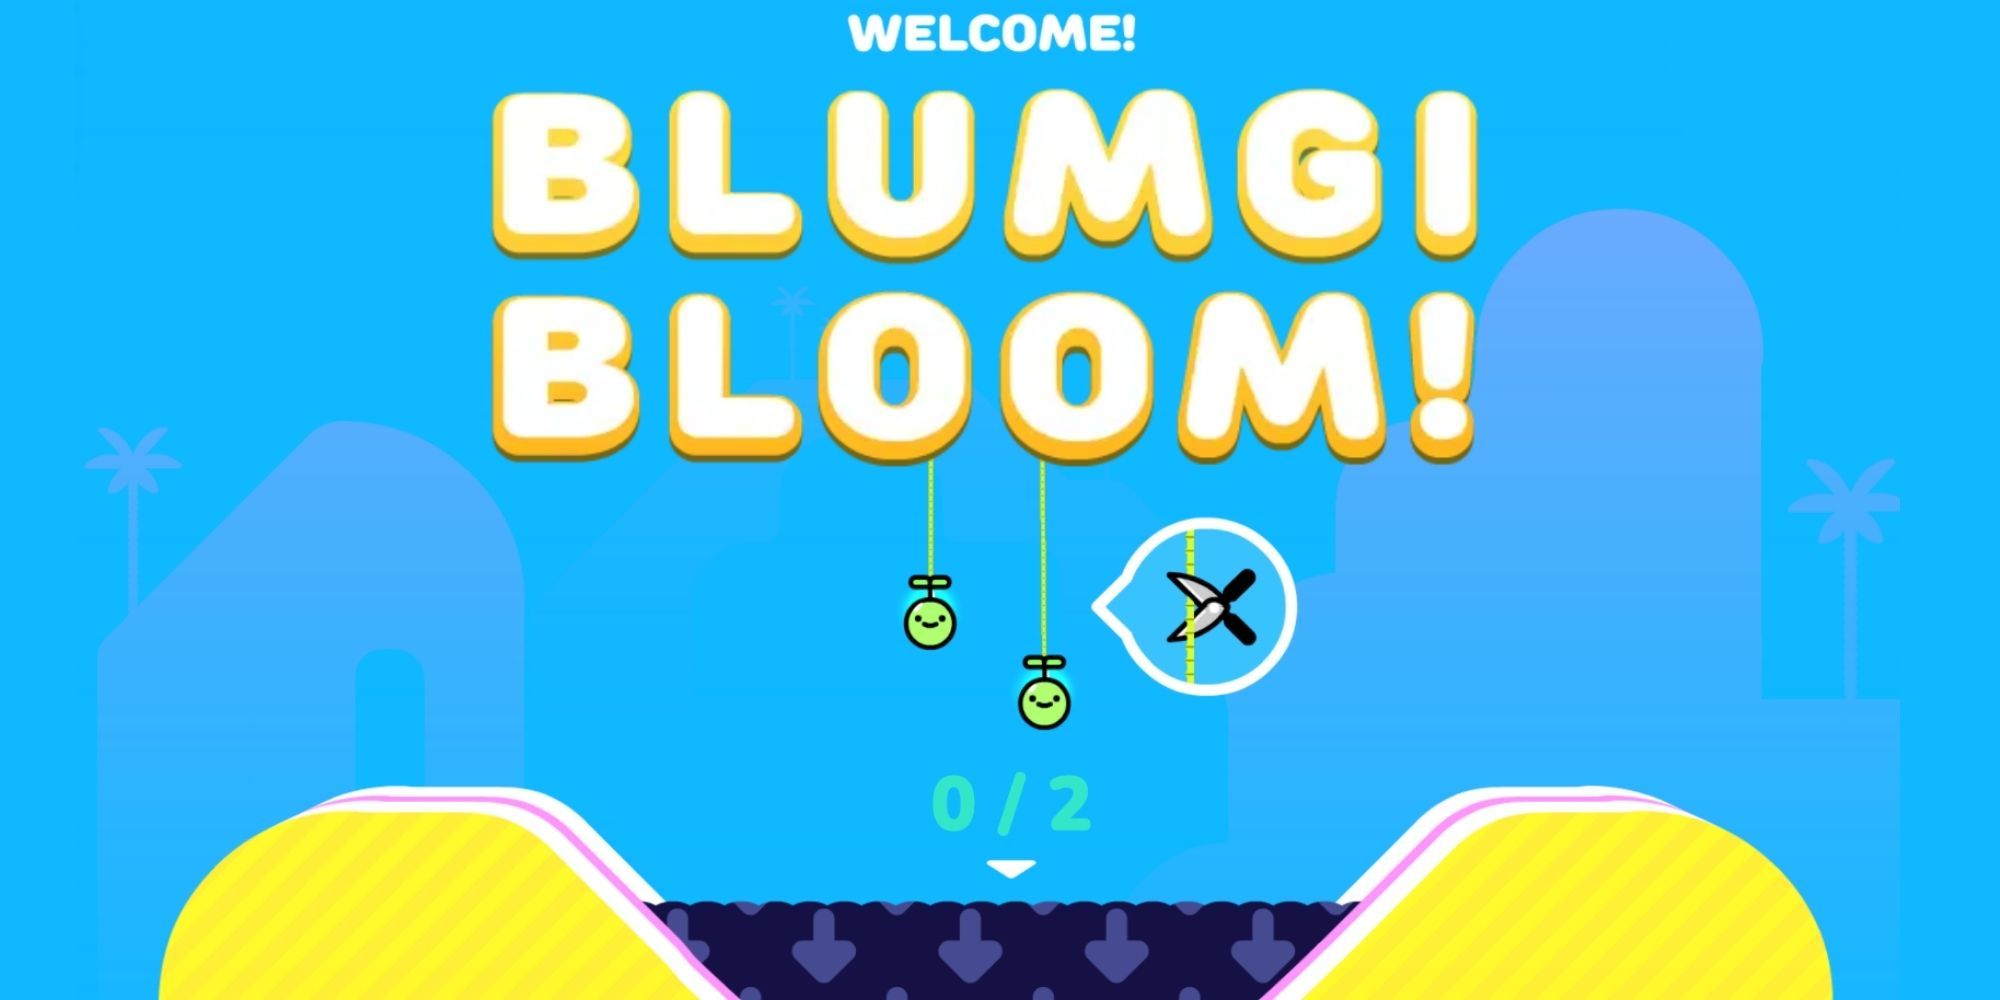 Blumgi Bloom welcome level one with game title